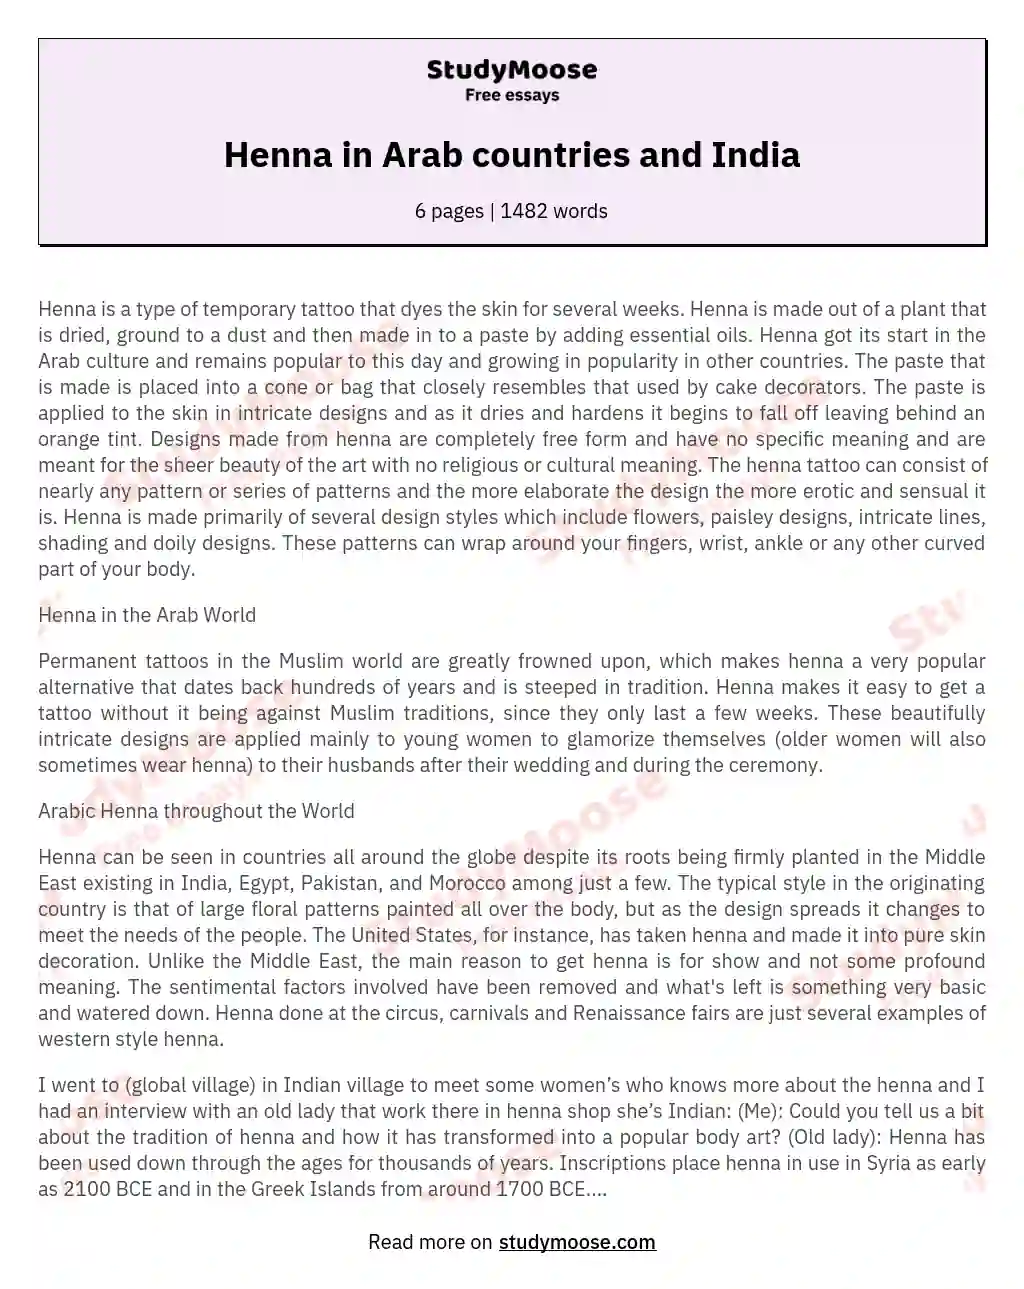 Henna in Arab countries and India essay